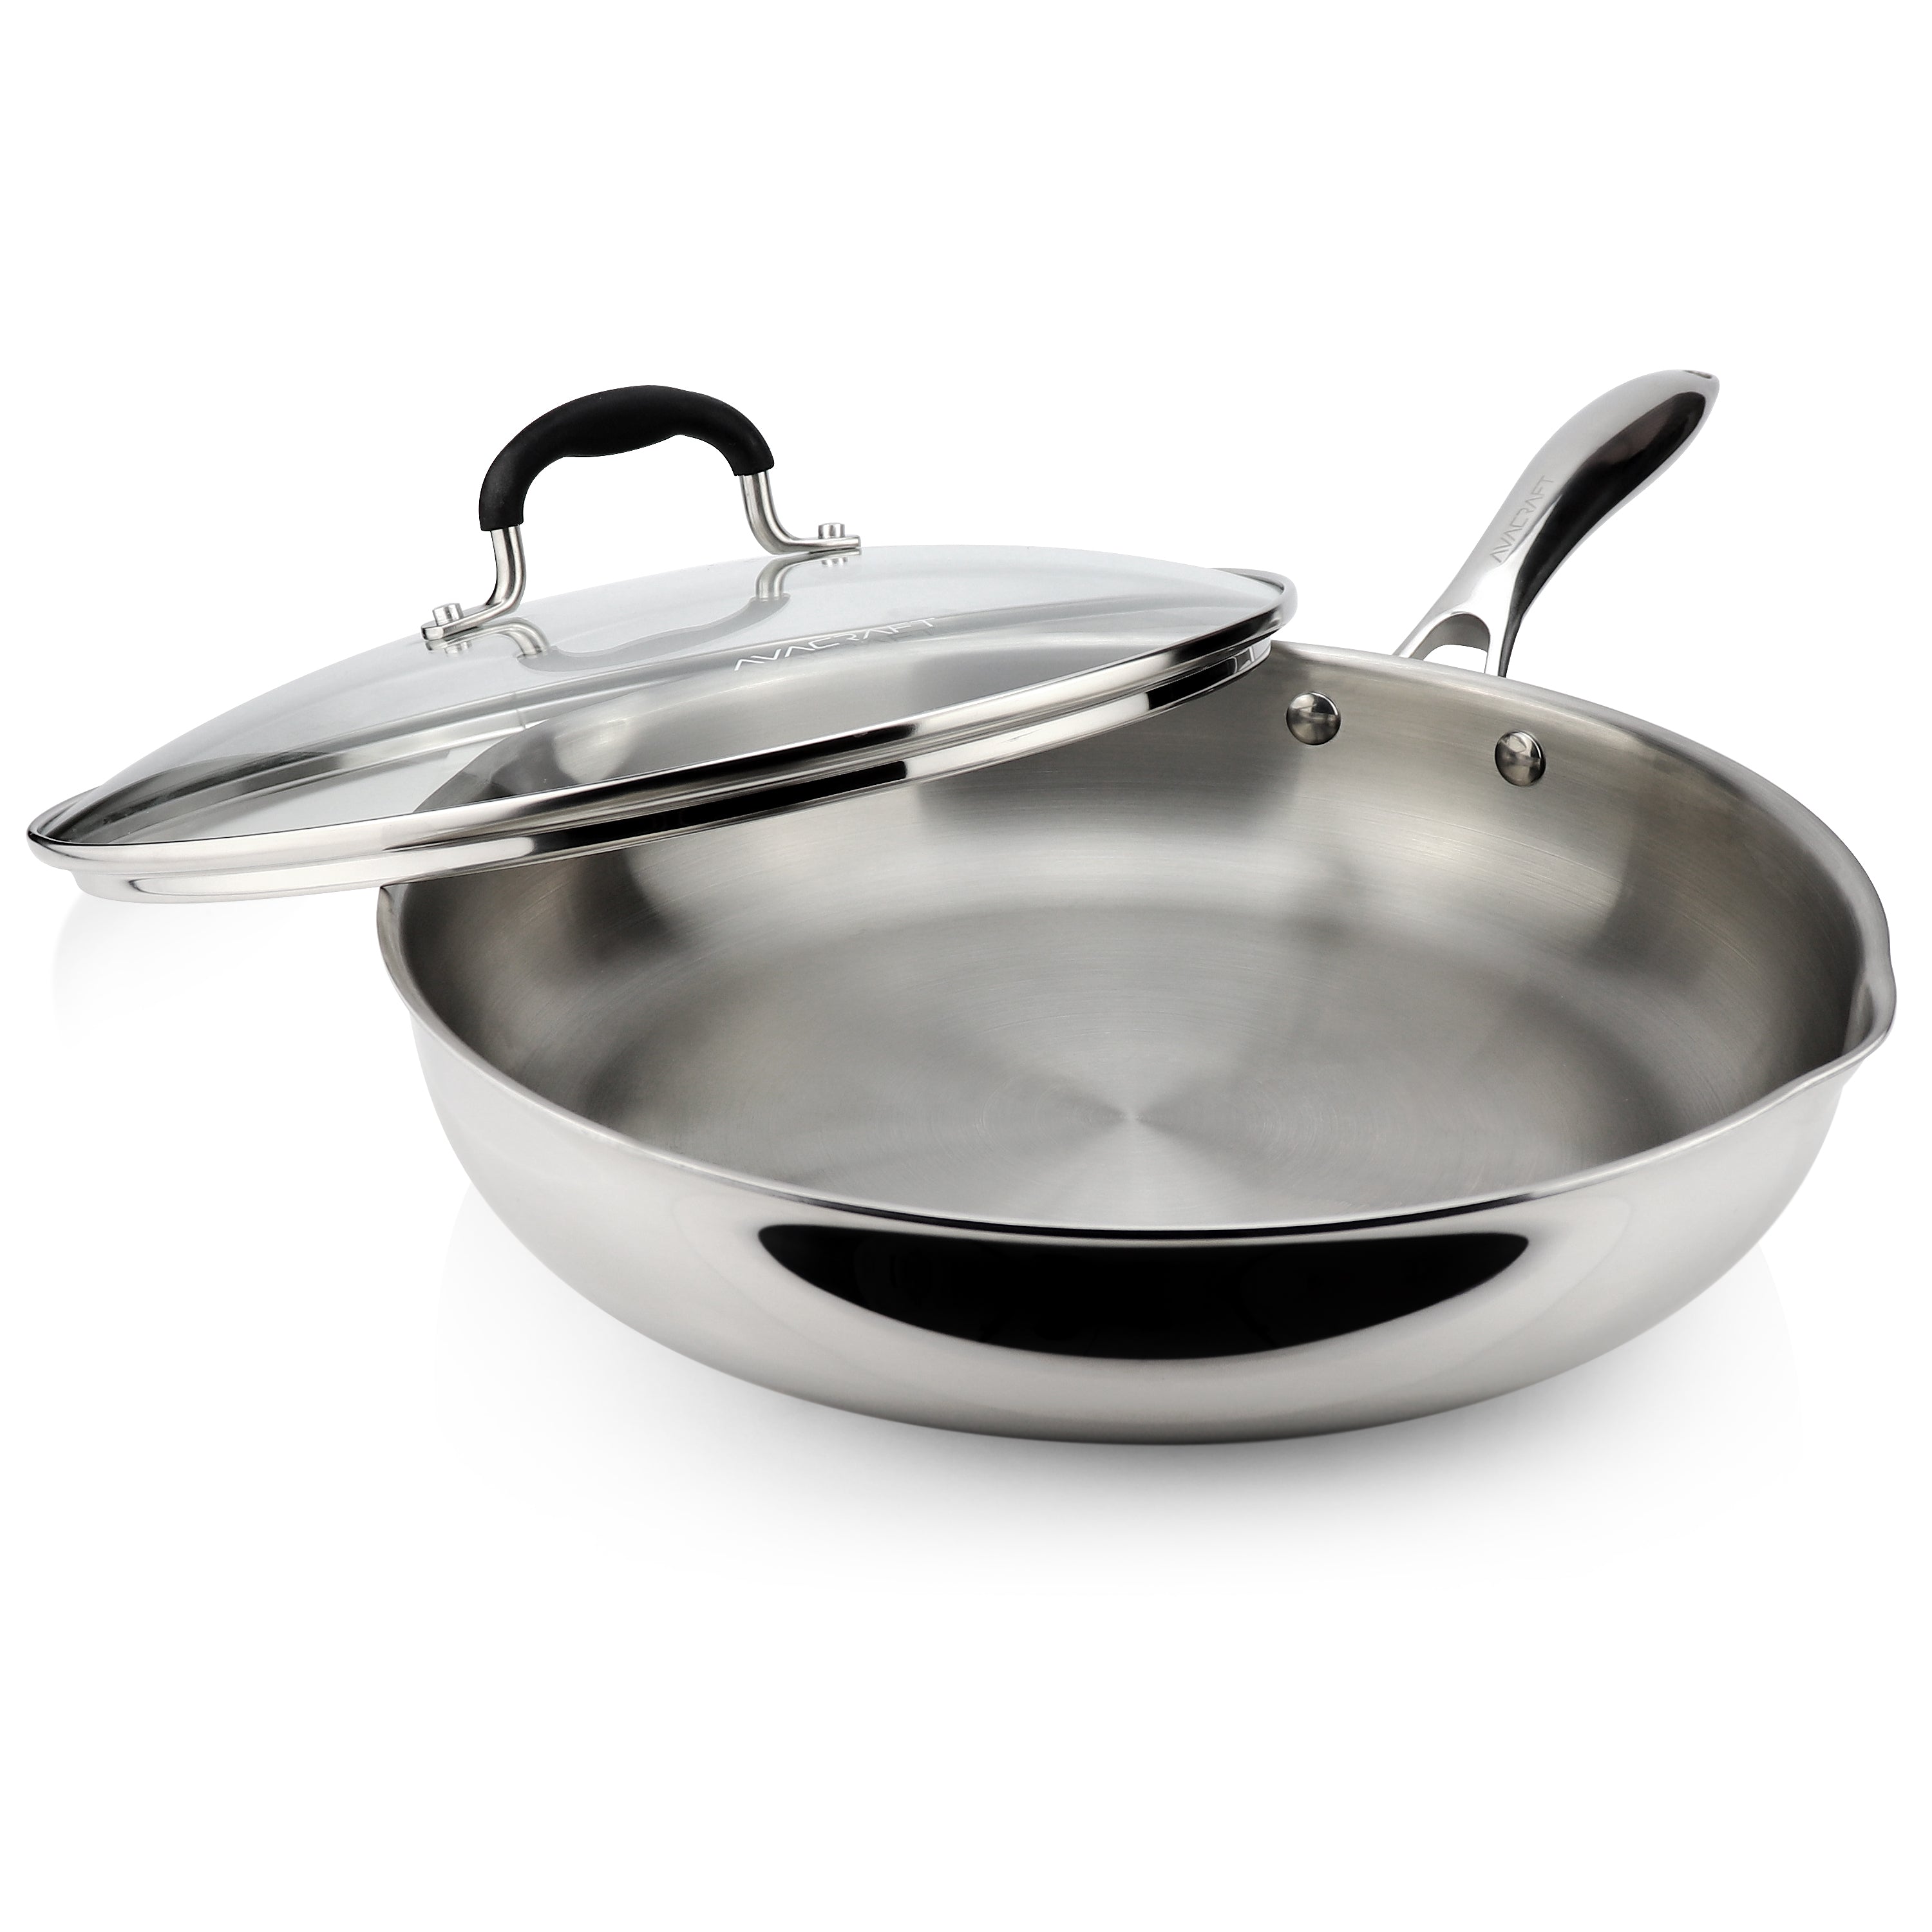 AVACRAFT 18/10 Stainless Steel Frying Pan with Lid and Side Spouts (Tri-Ply Full Body, 12 Inch)